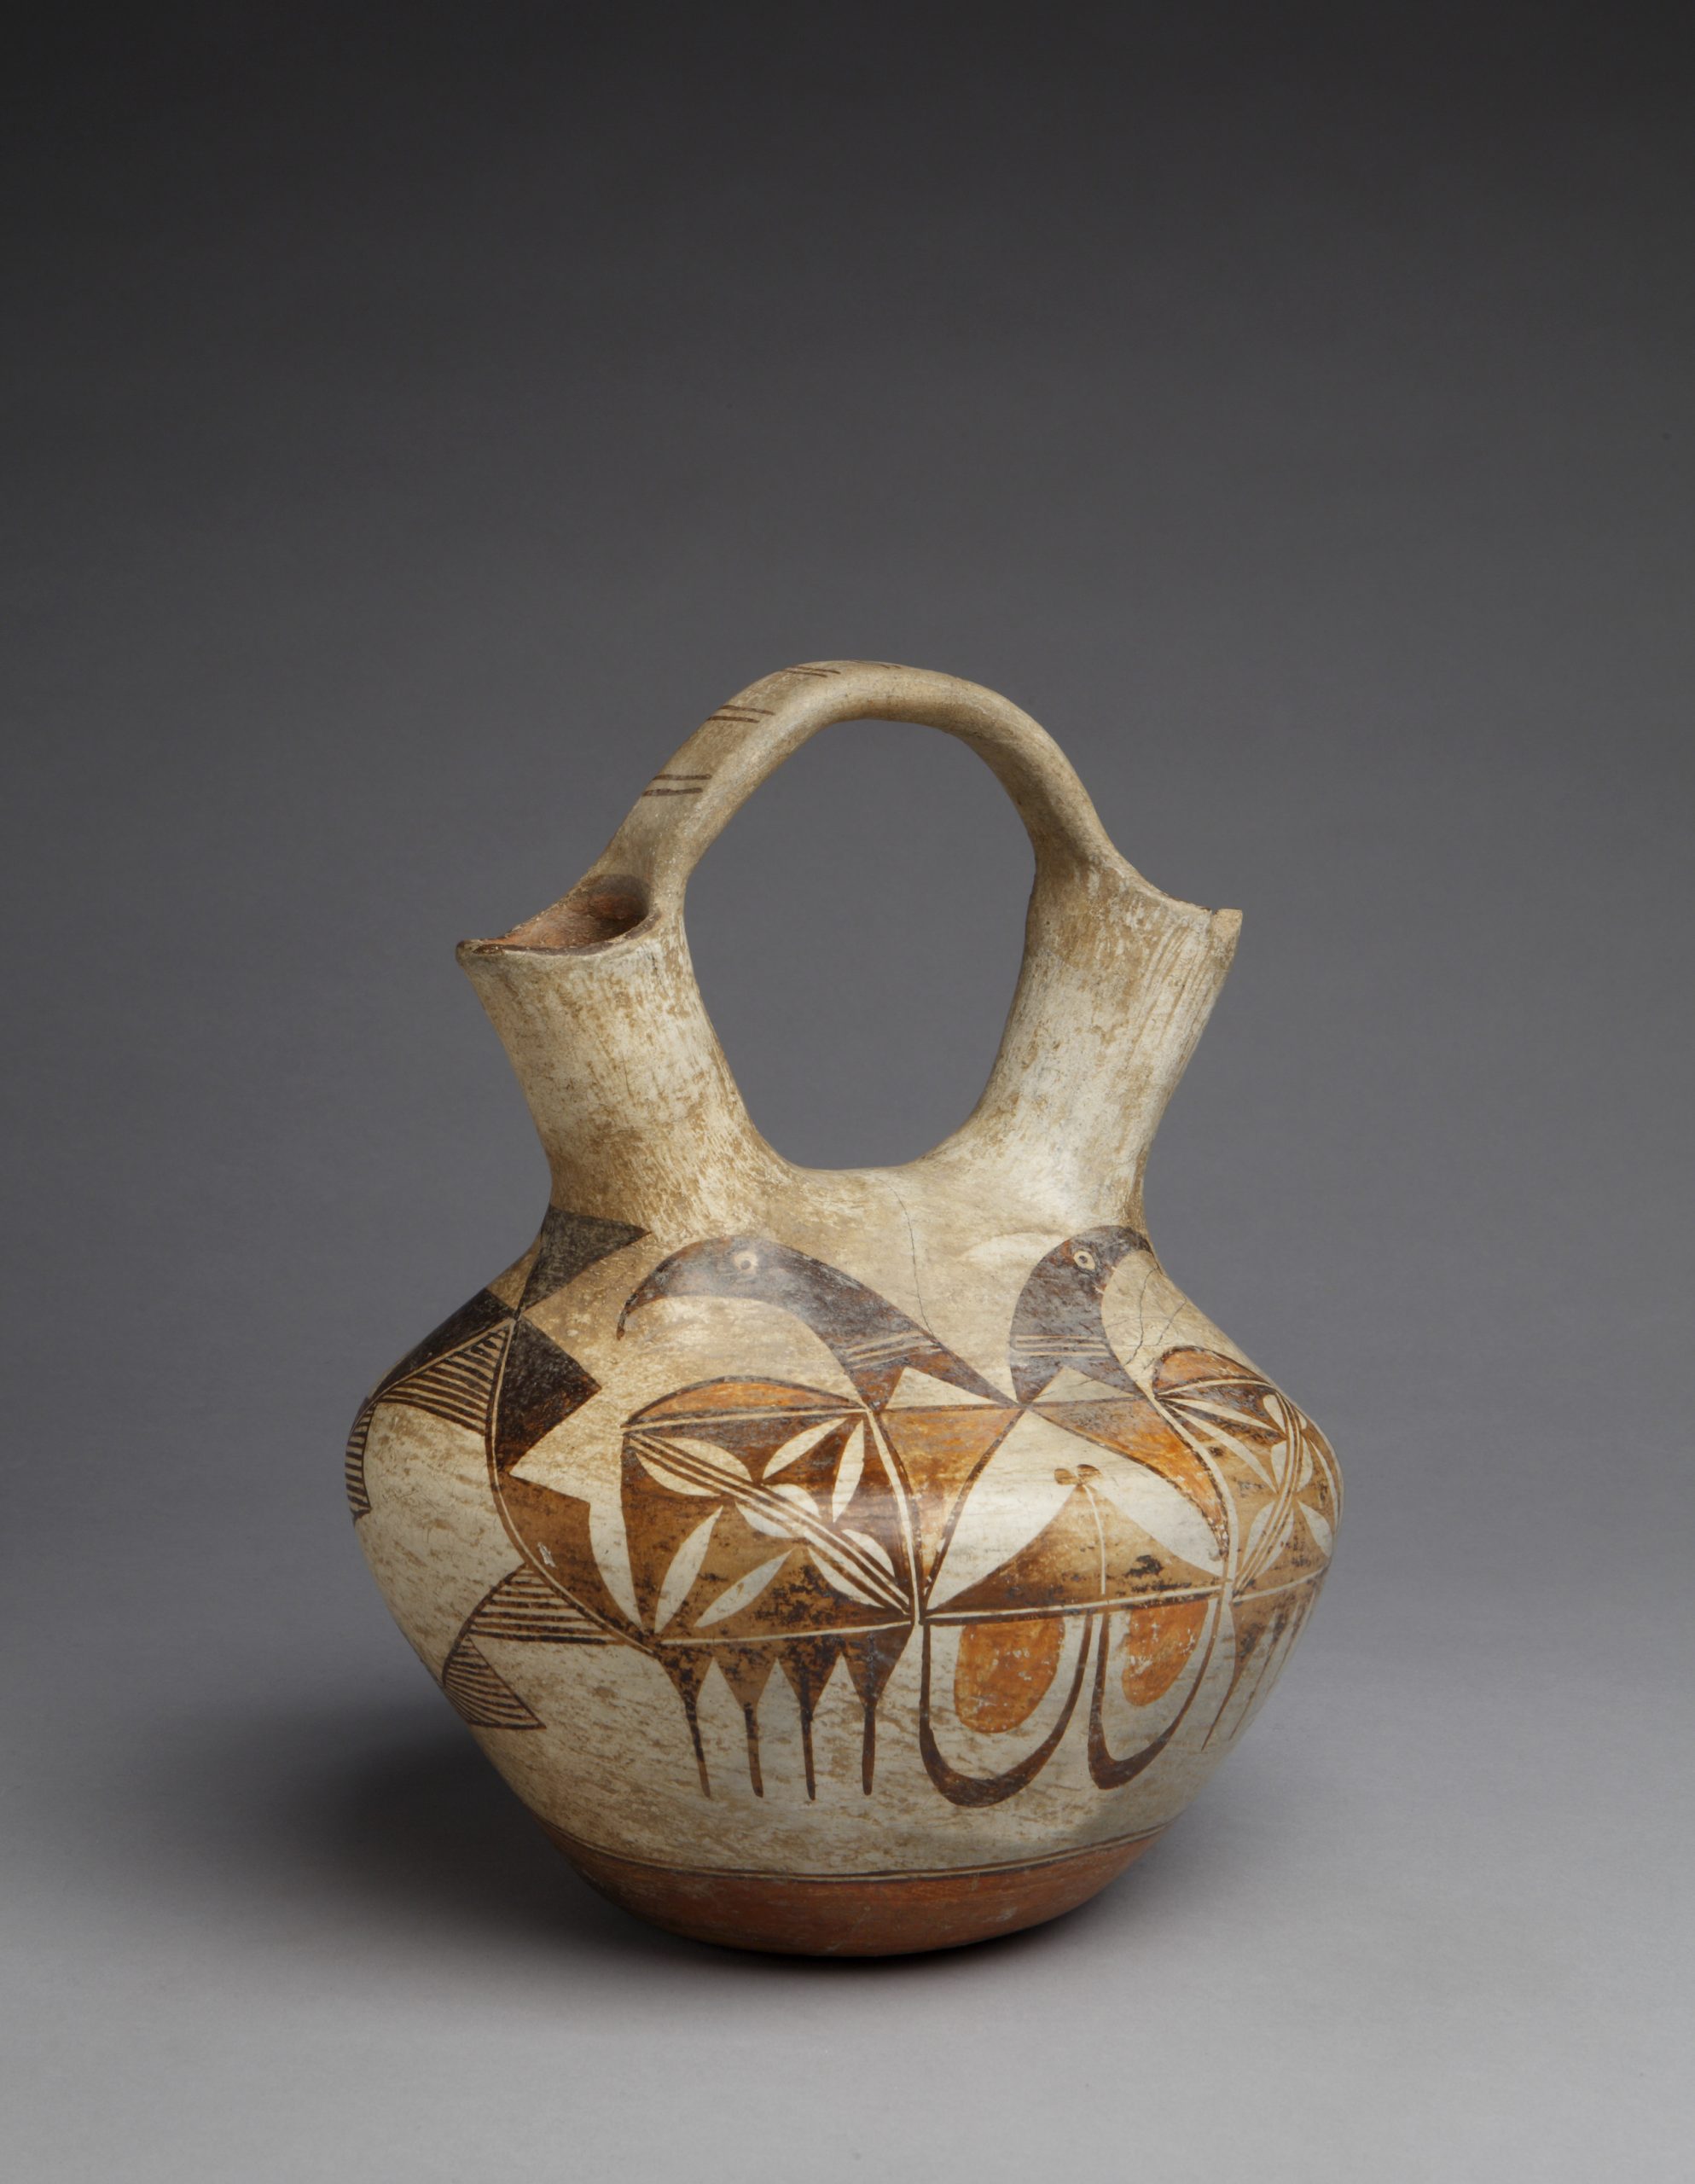 Wedding vase, Artist unknown (Acoma Pueblo), 1920-1930, clay, paints, 10 ½” x 8”. Cat. no. IAF.1057. Photo by Addison Doty.